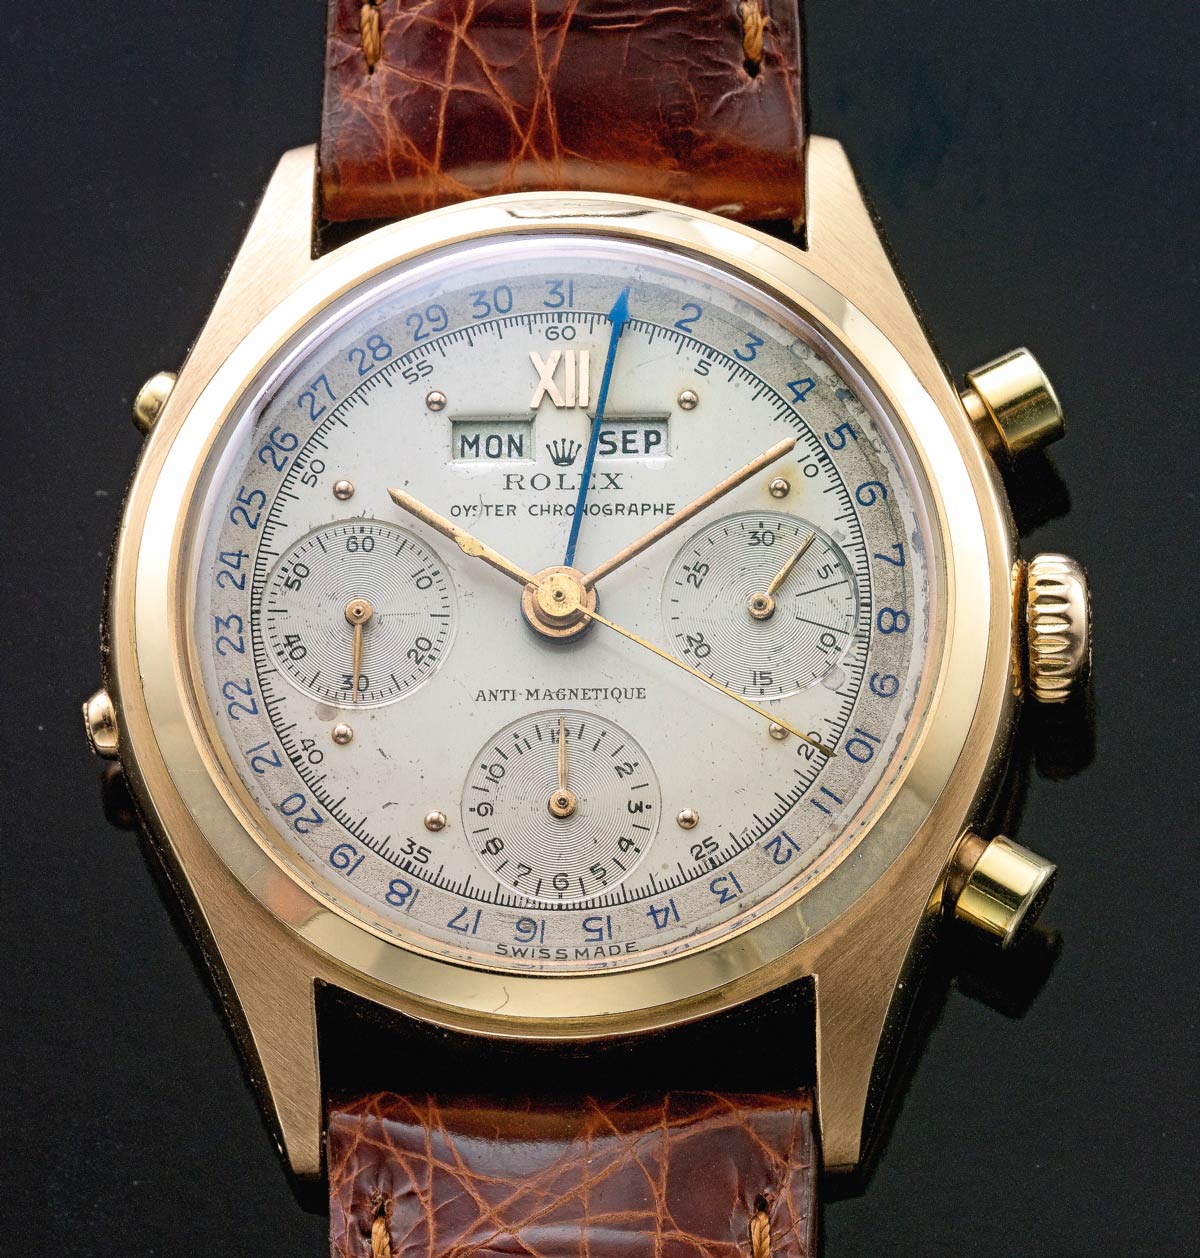 A Few Highlights from the Sotheby’s Important Watches Auction